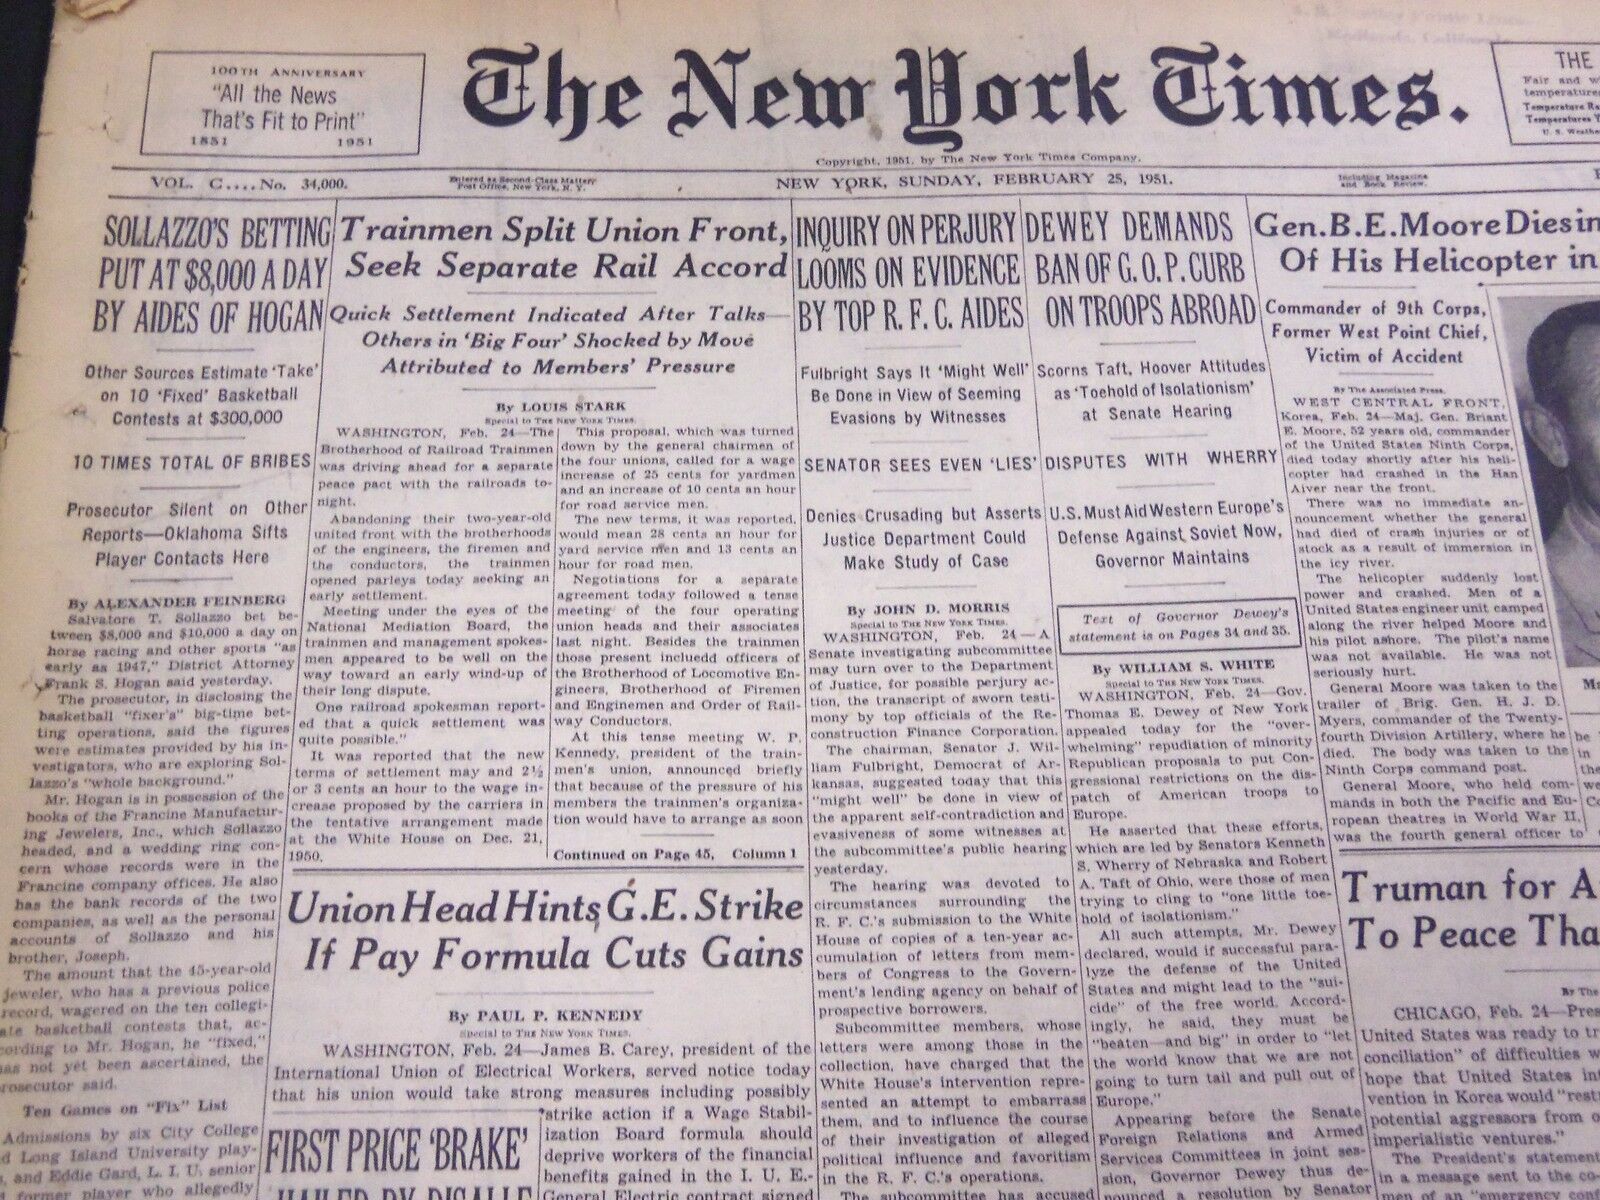 1951 FEBRUARY 25 NEW YORK TIMES - SOLLAZZO BETTING $8,000 A DAY - NT 4287